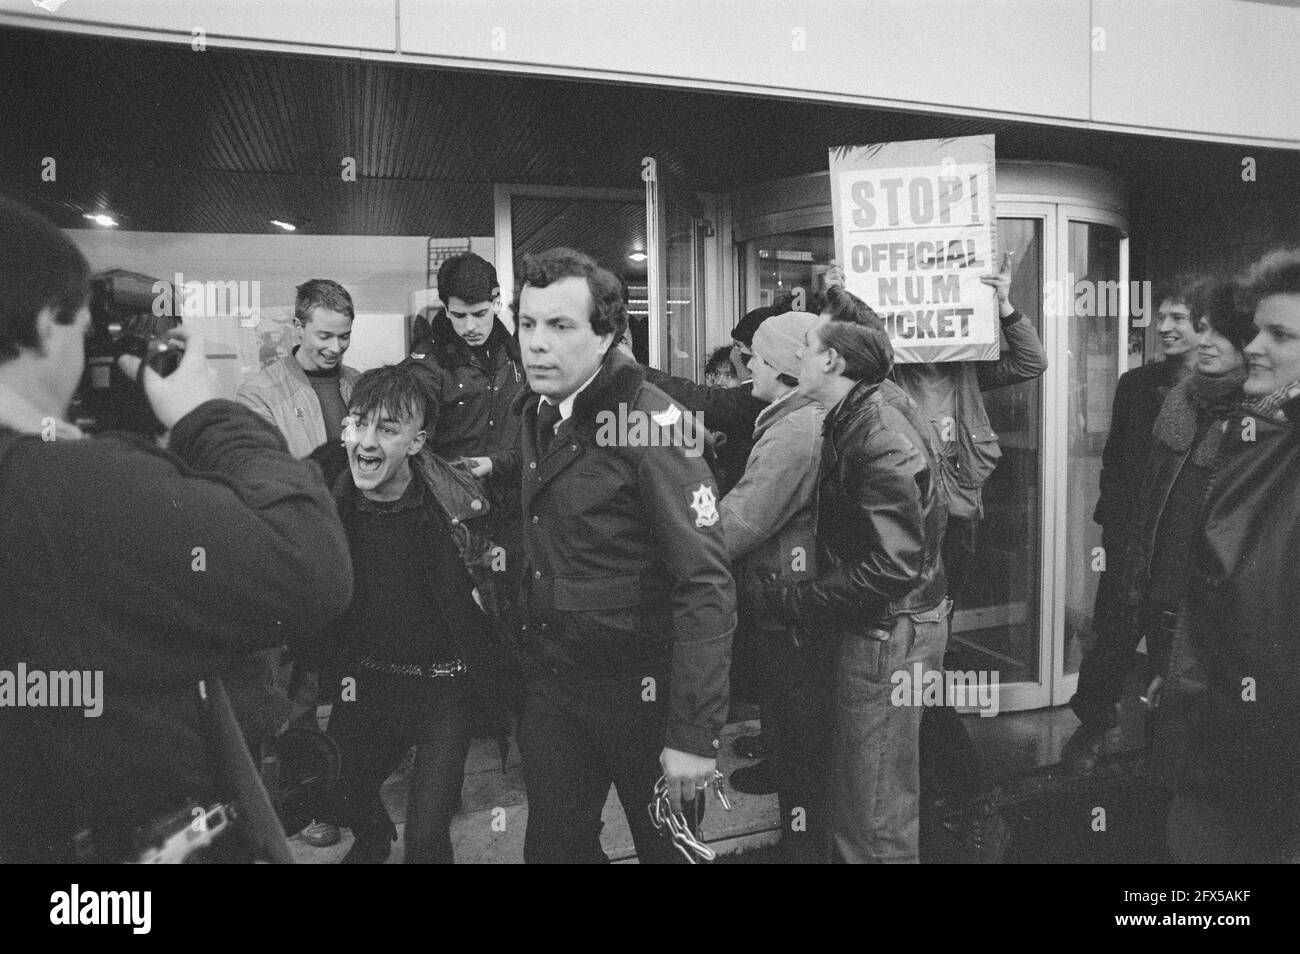 FNV headquarters occupied by sympathizers of the British mine strikers; police remove the acitivists, January 22, 1985, POLICE, occupation, headquarters, The Netherlands, 20th century press agency photo, news to remember, documentary, historic photography 1945-1990, visual stories, human history of the Twentieth Century, capturing moments in time Stock Photo